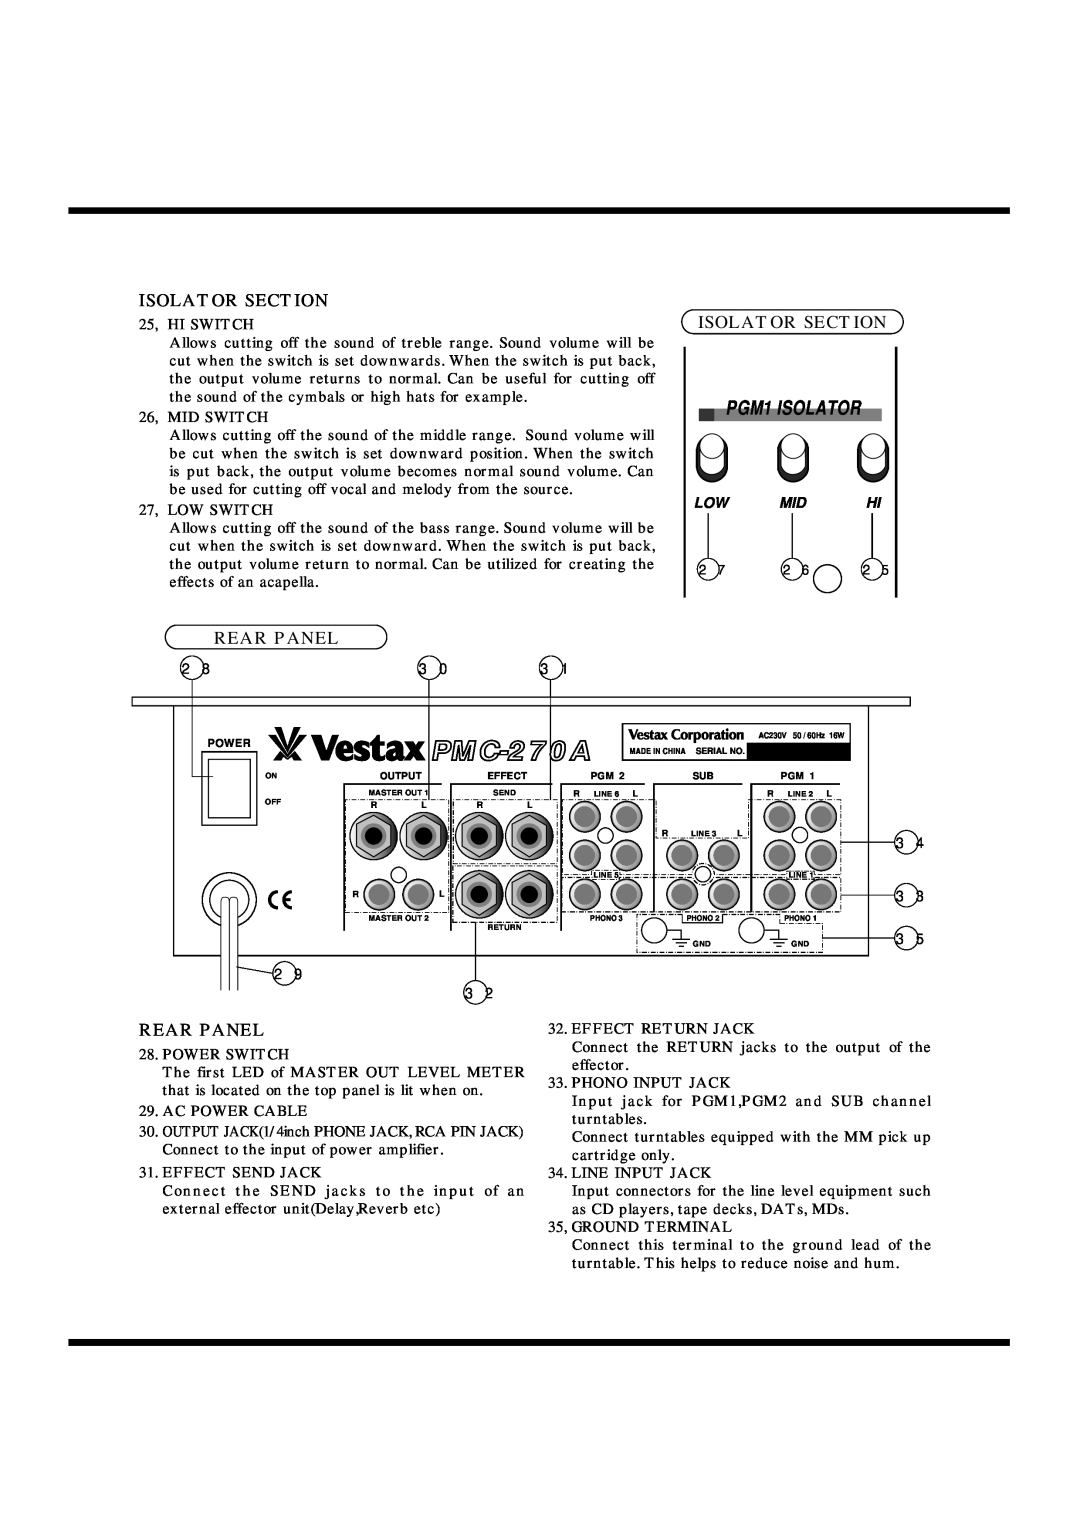 Vestax PMC-270A owner manual PGM1 ISOLATOR, Low Mid Hi 